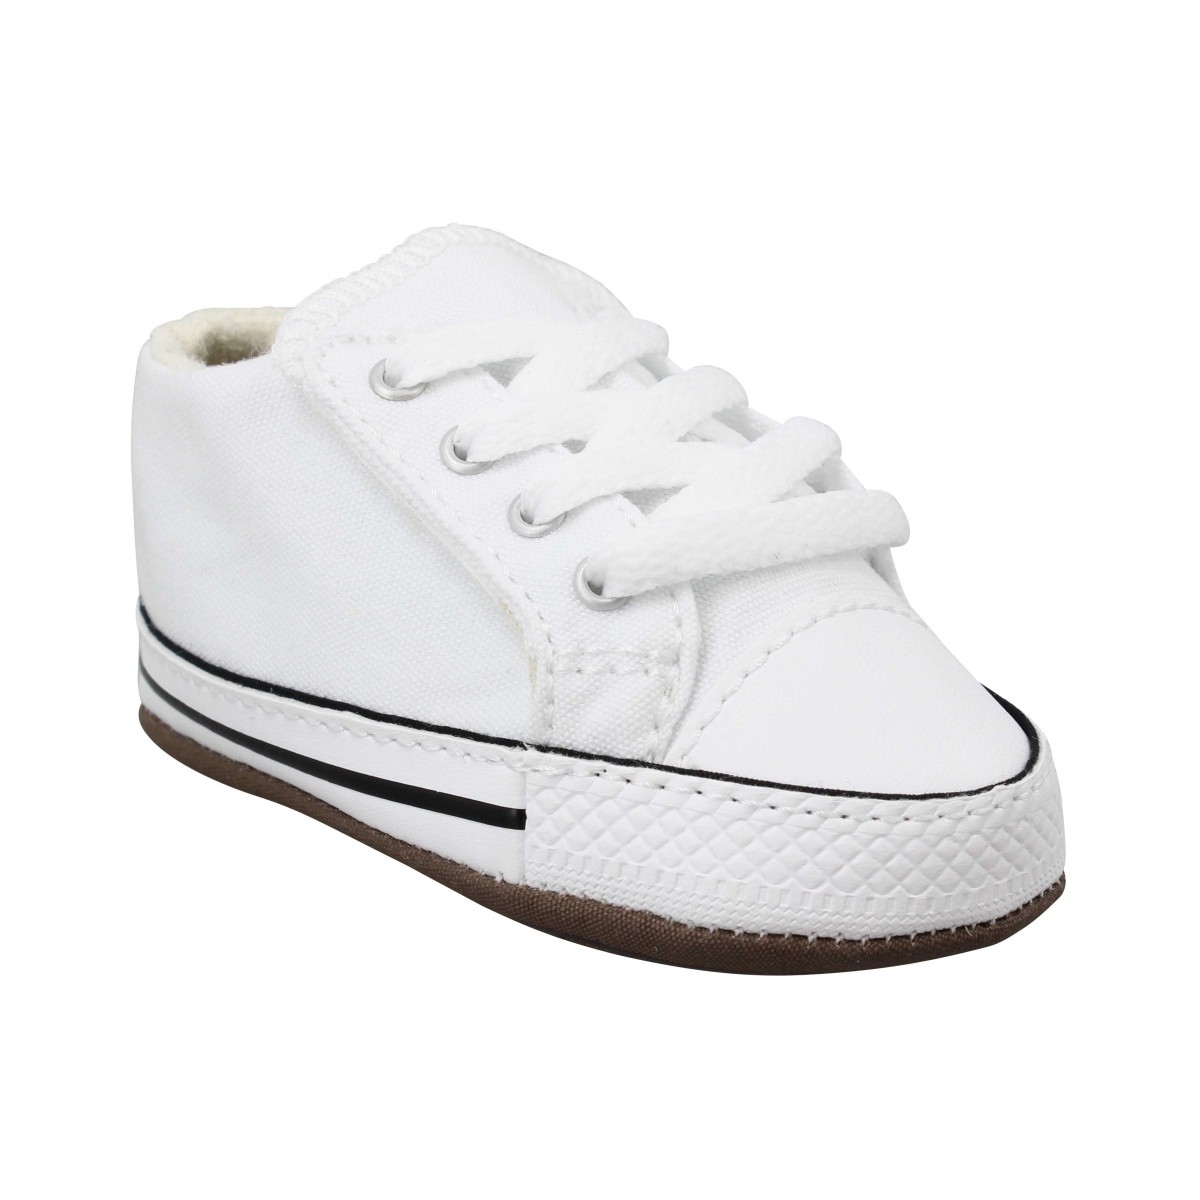 Baskets CONVERSE Chuck Taylor All Star Cribster Mid toile Enfant Blanc